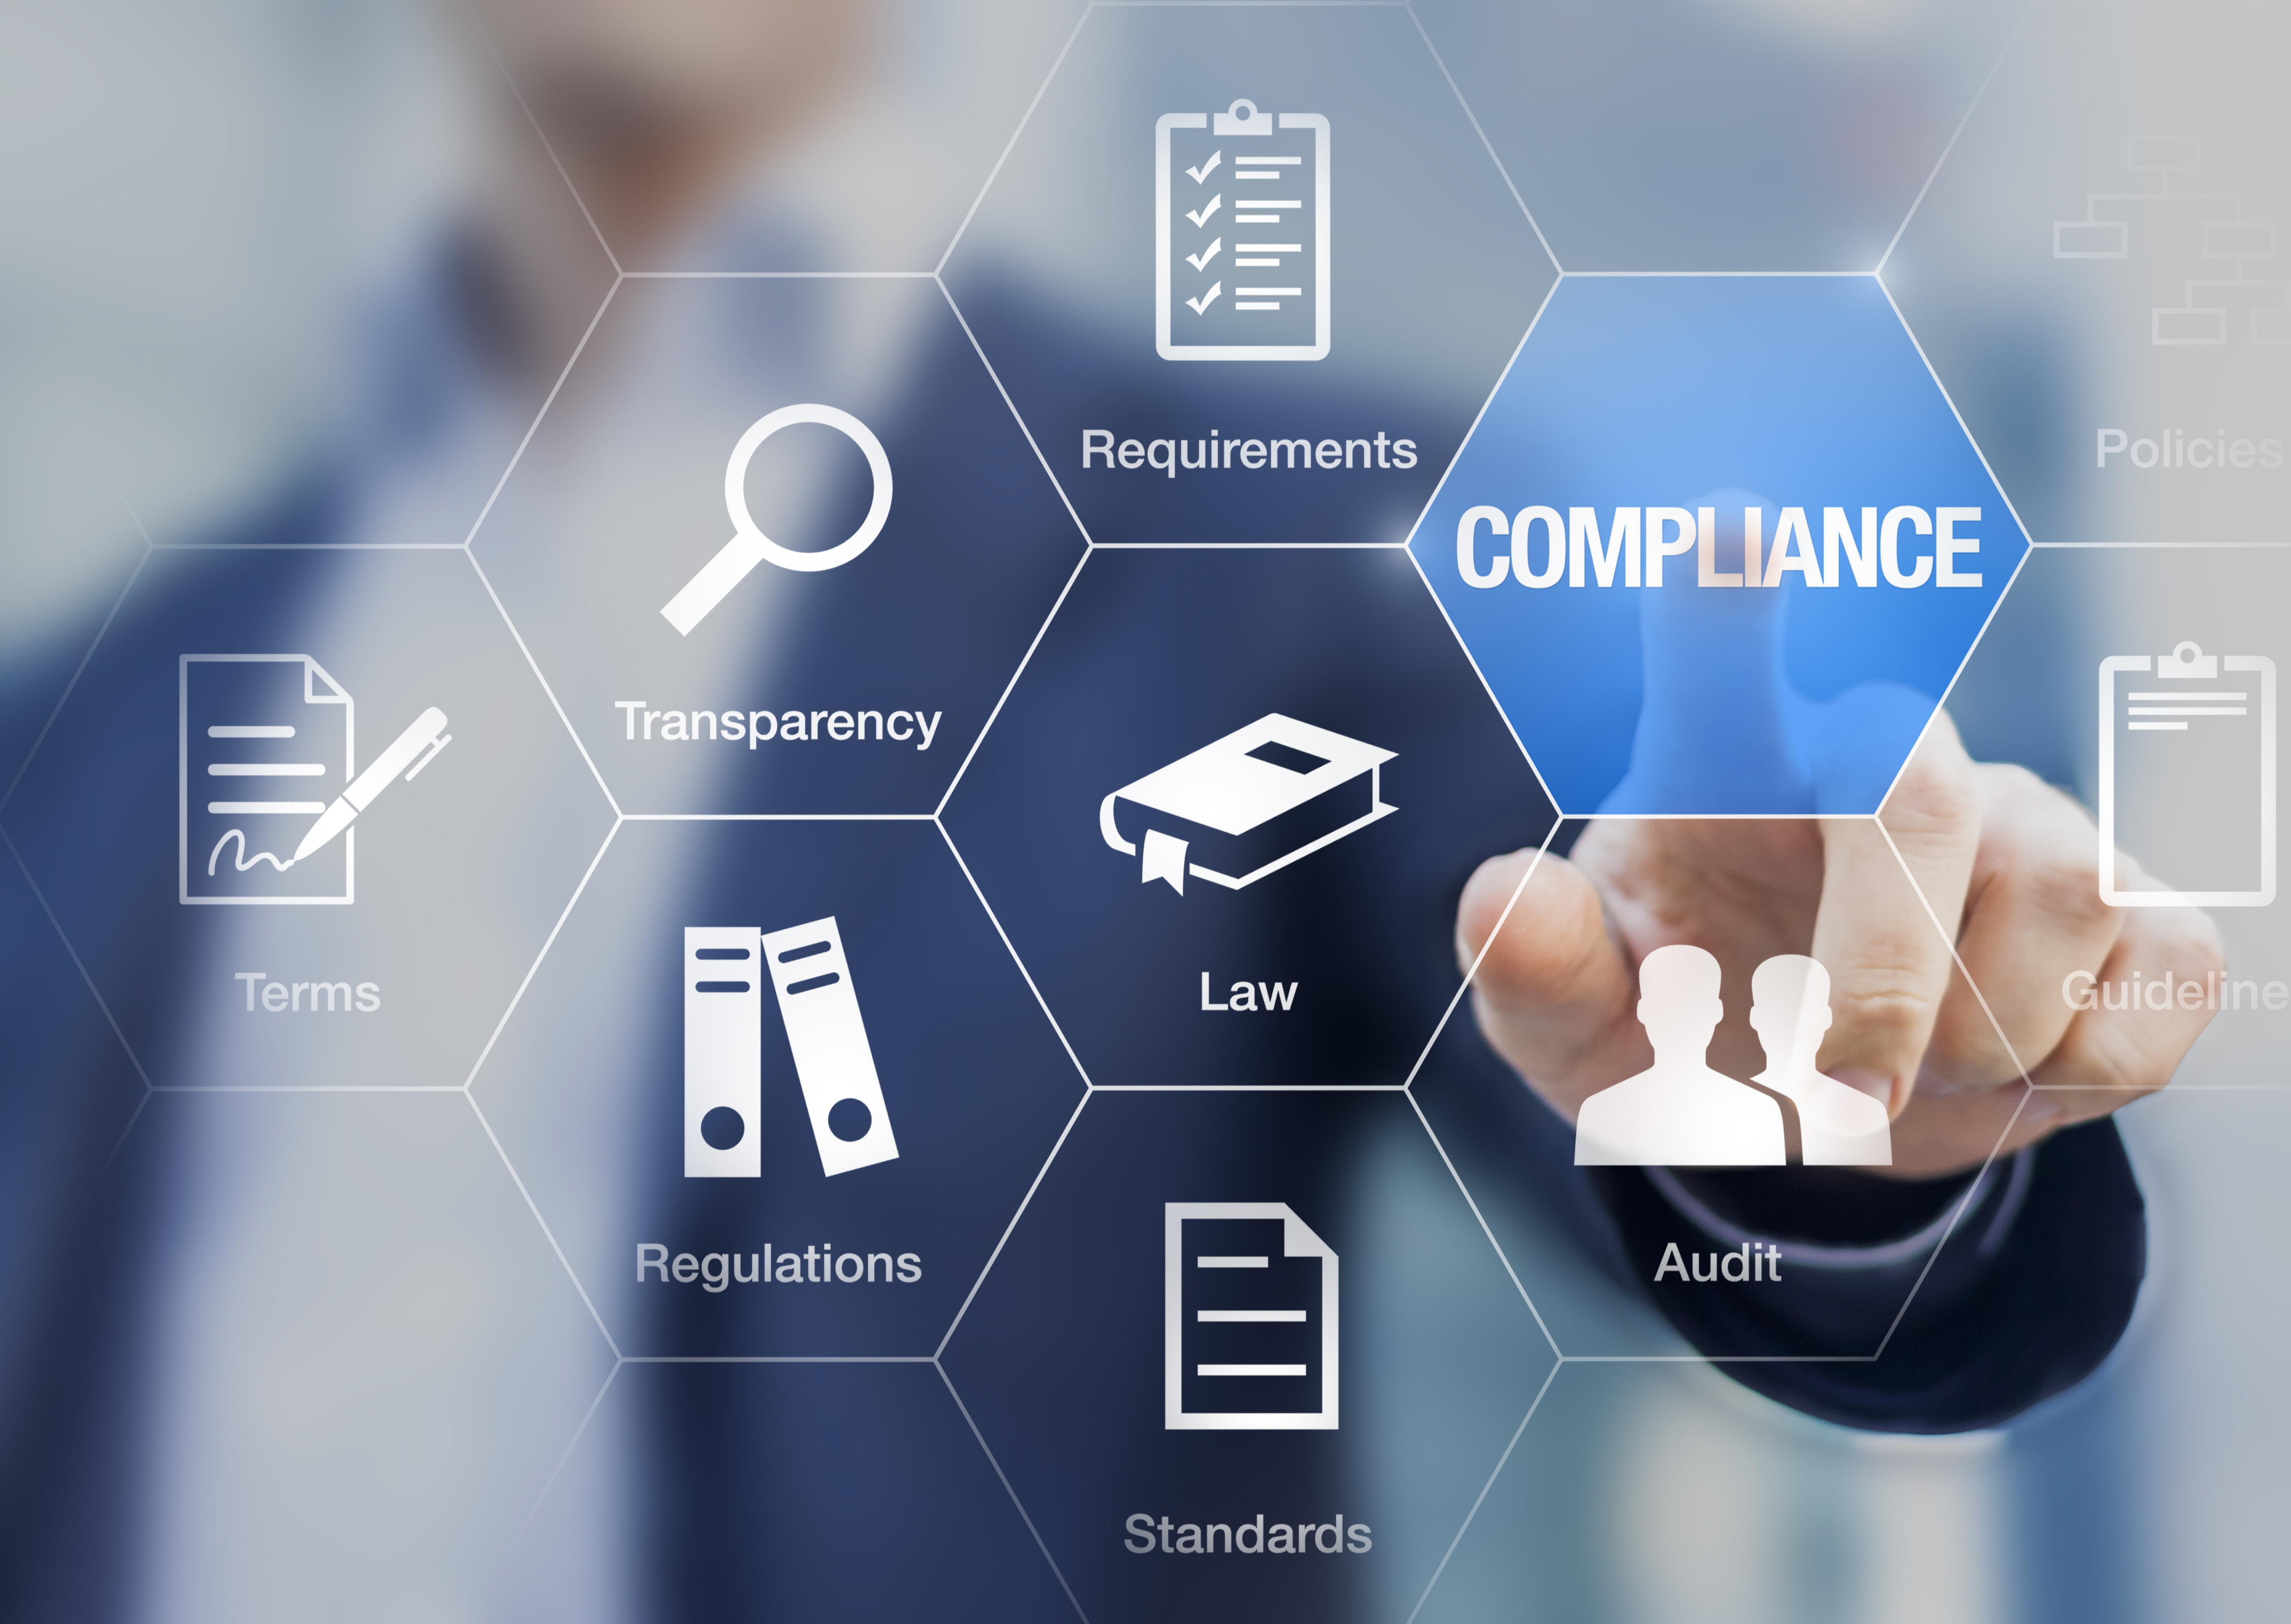 ComReg issues opinions of Non-Compliance